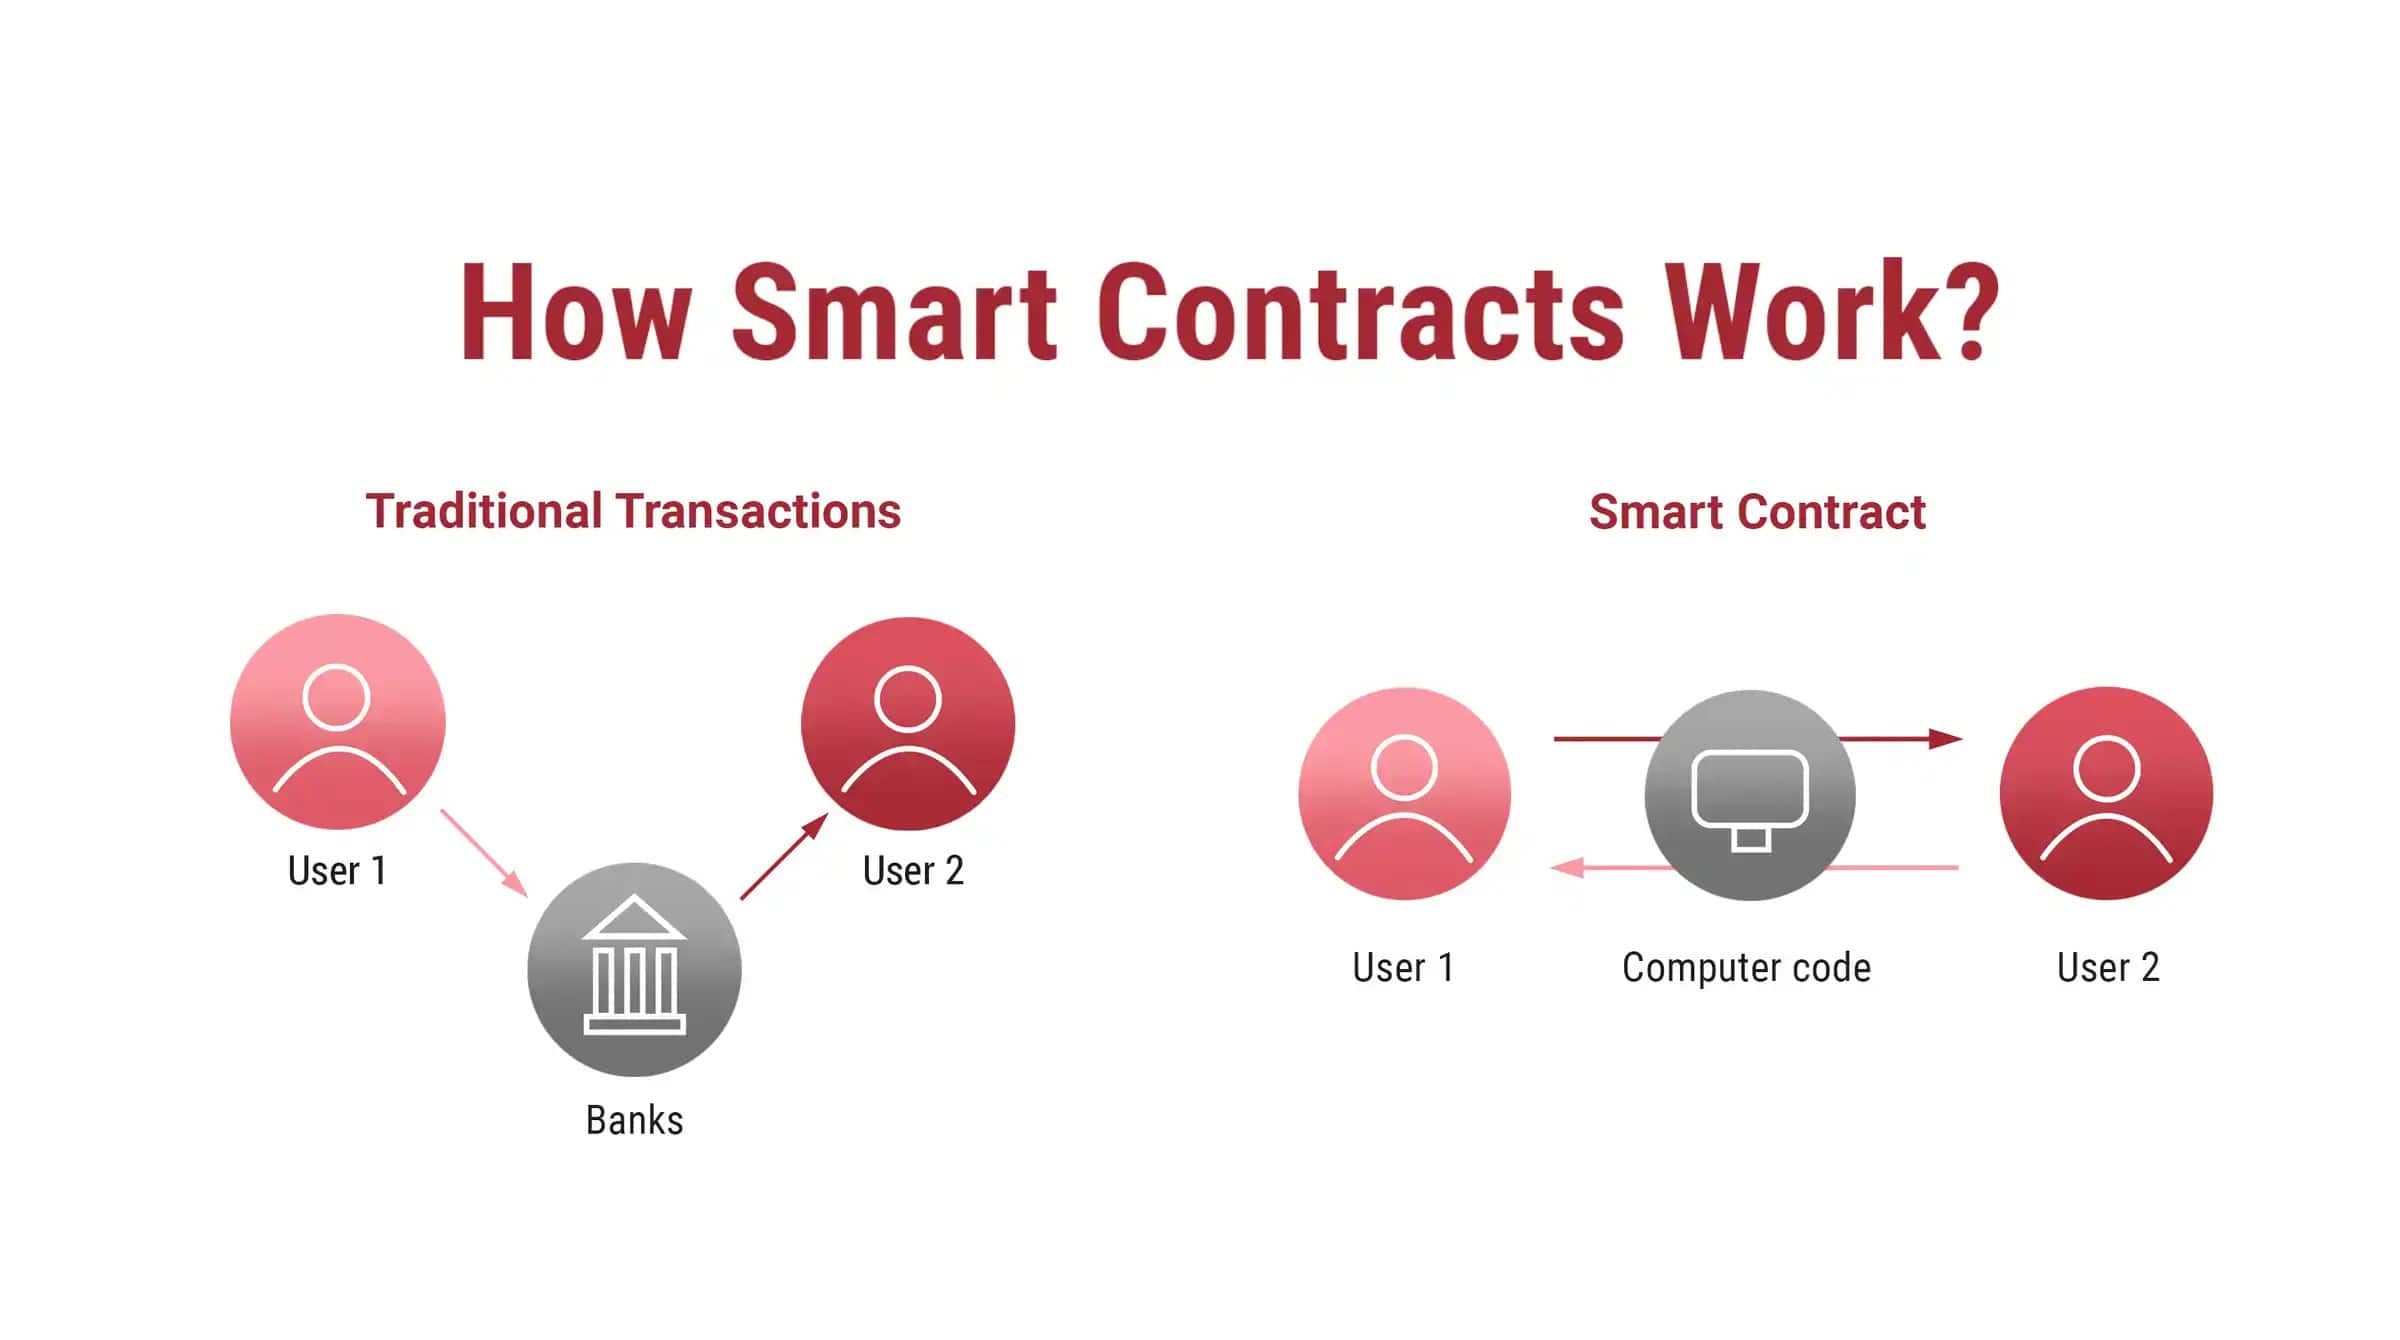 Smart contracts in real estate: Third parties not involved